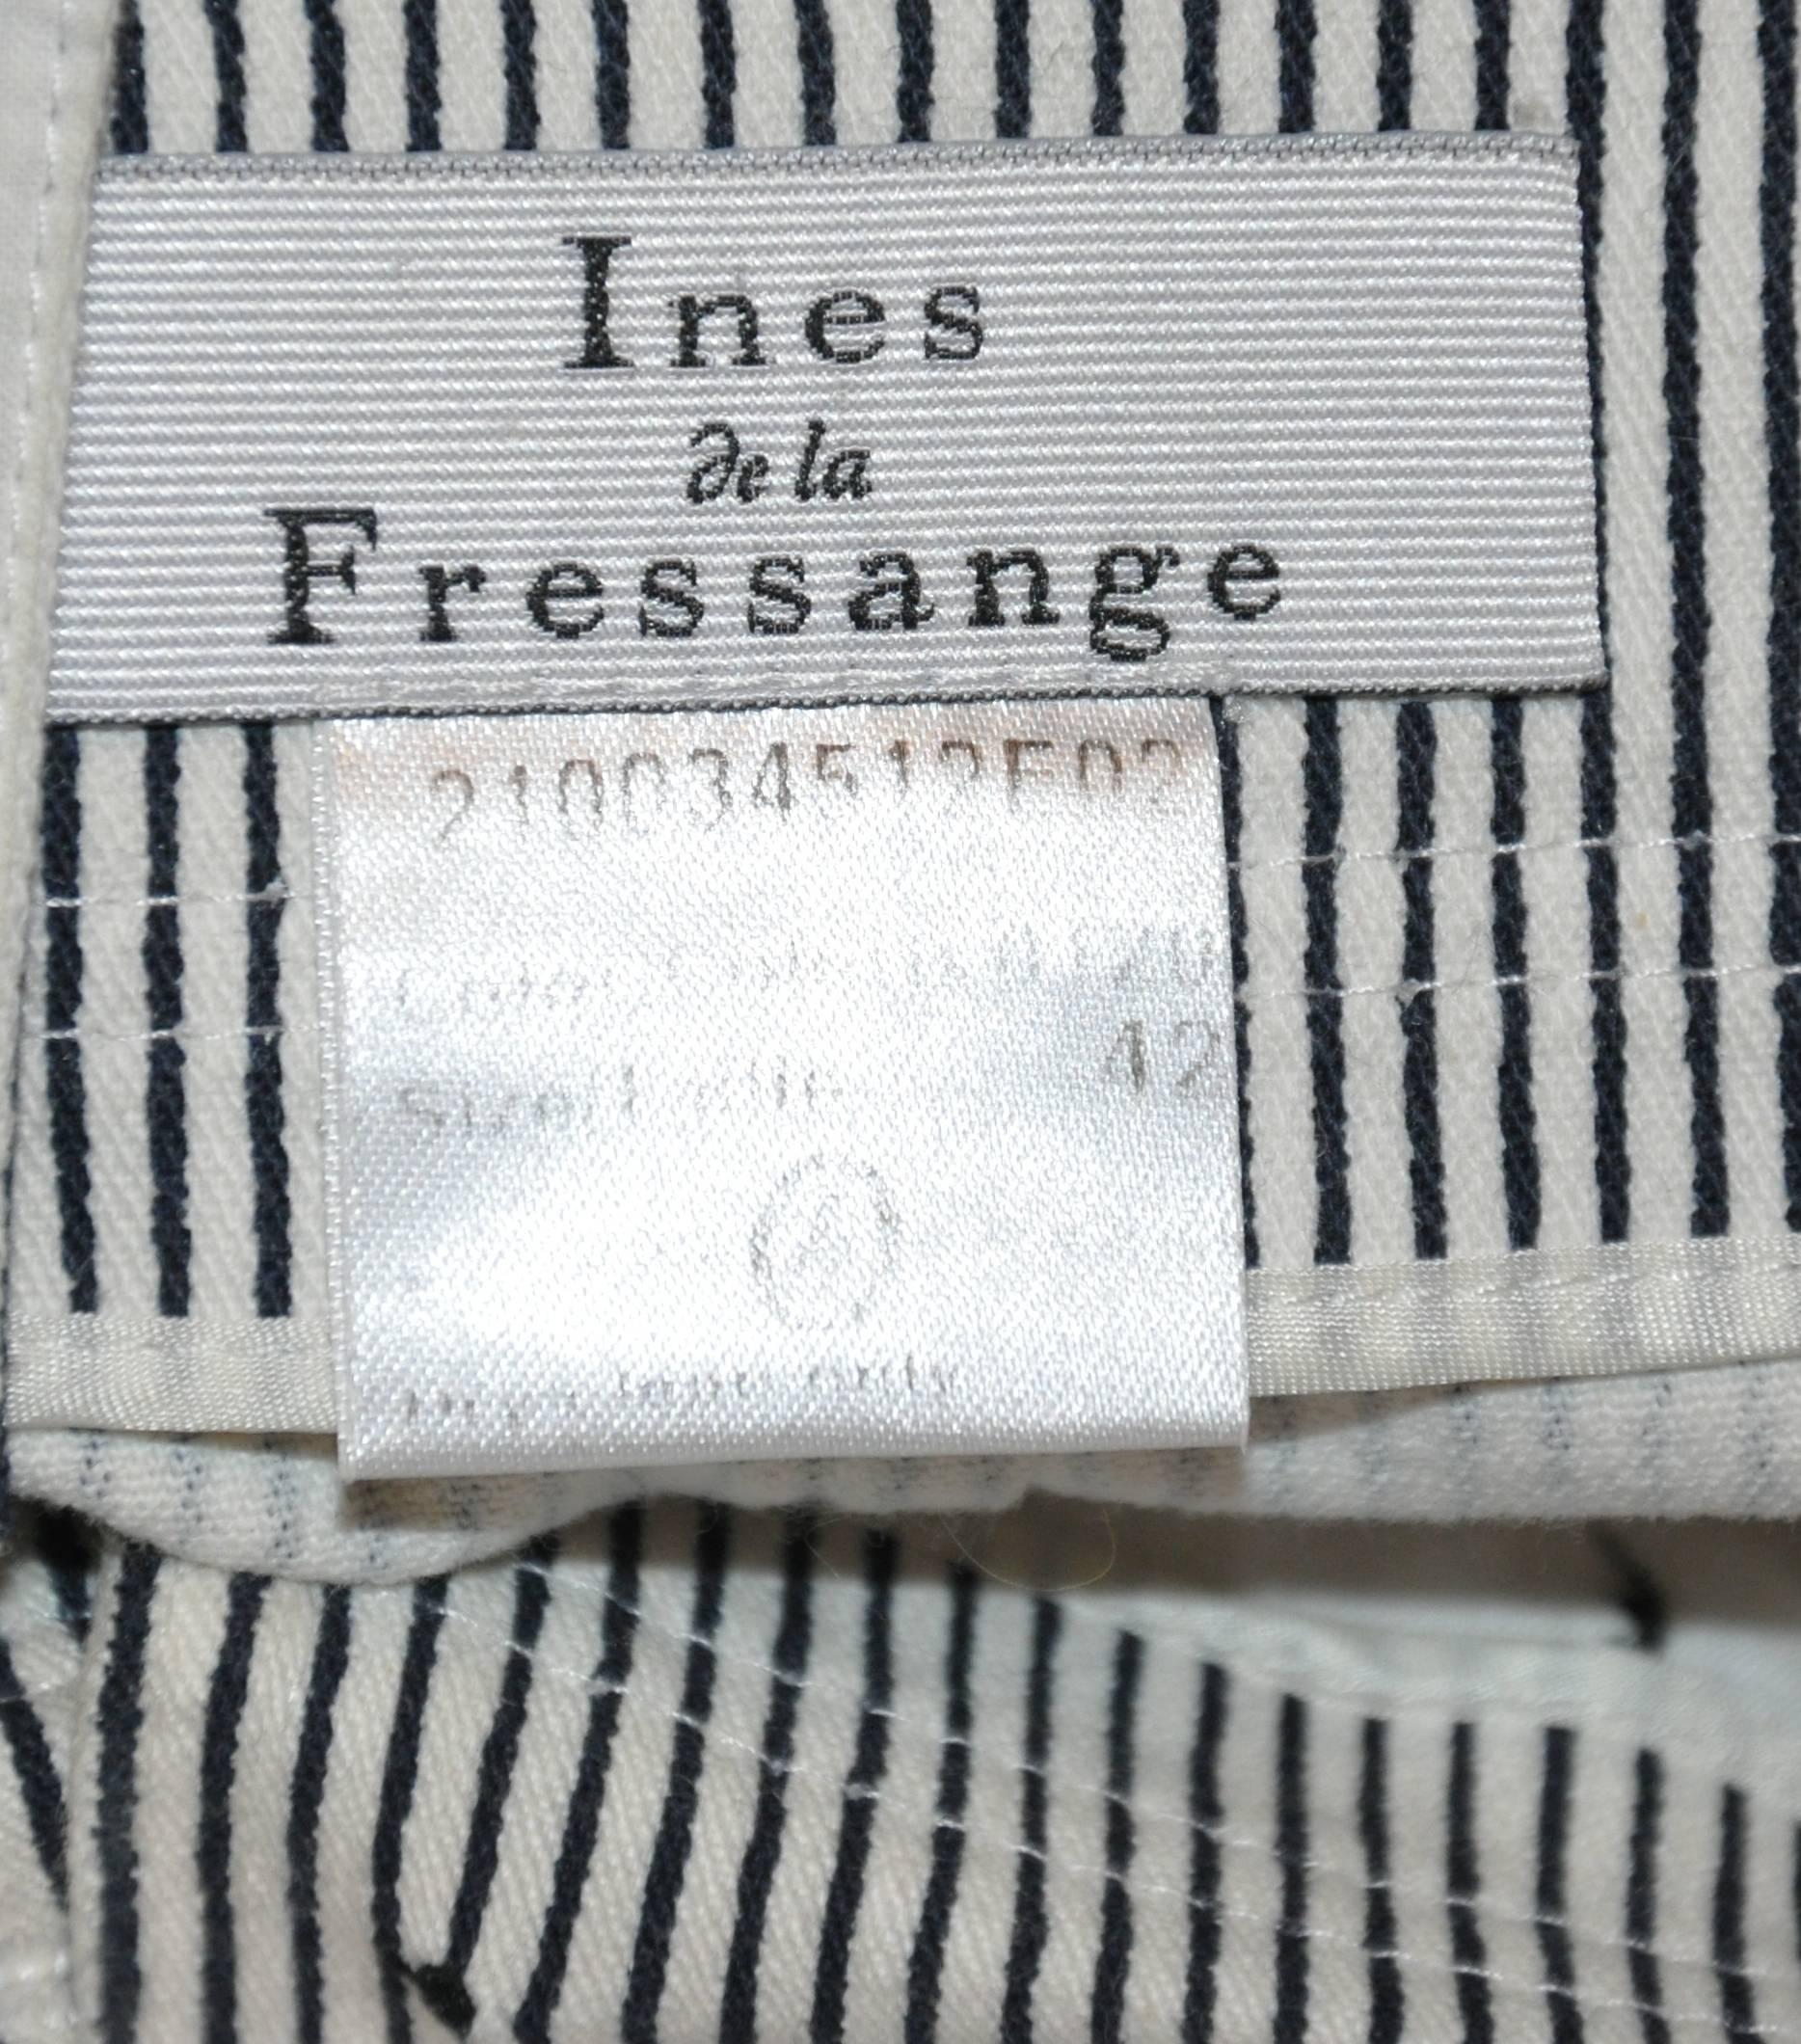           Ines de la Fressange wonderfully detailed black & white cotton combined with spandex sailor-style trousers has the optional tie-back on the center back waistband. The front has detailed buttons as well as 1 3/4